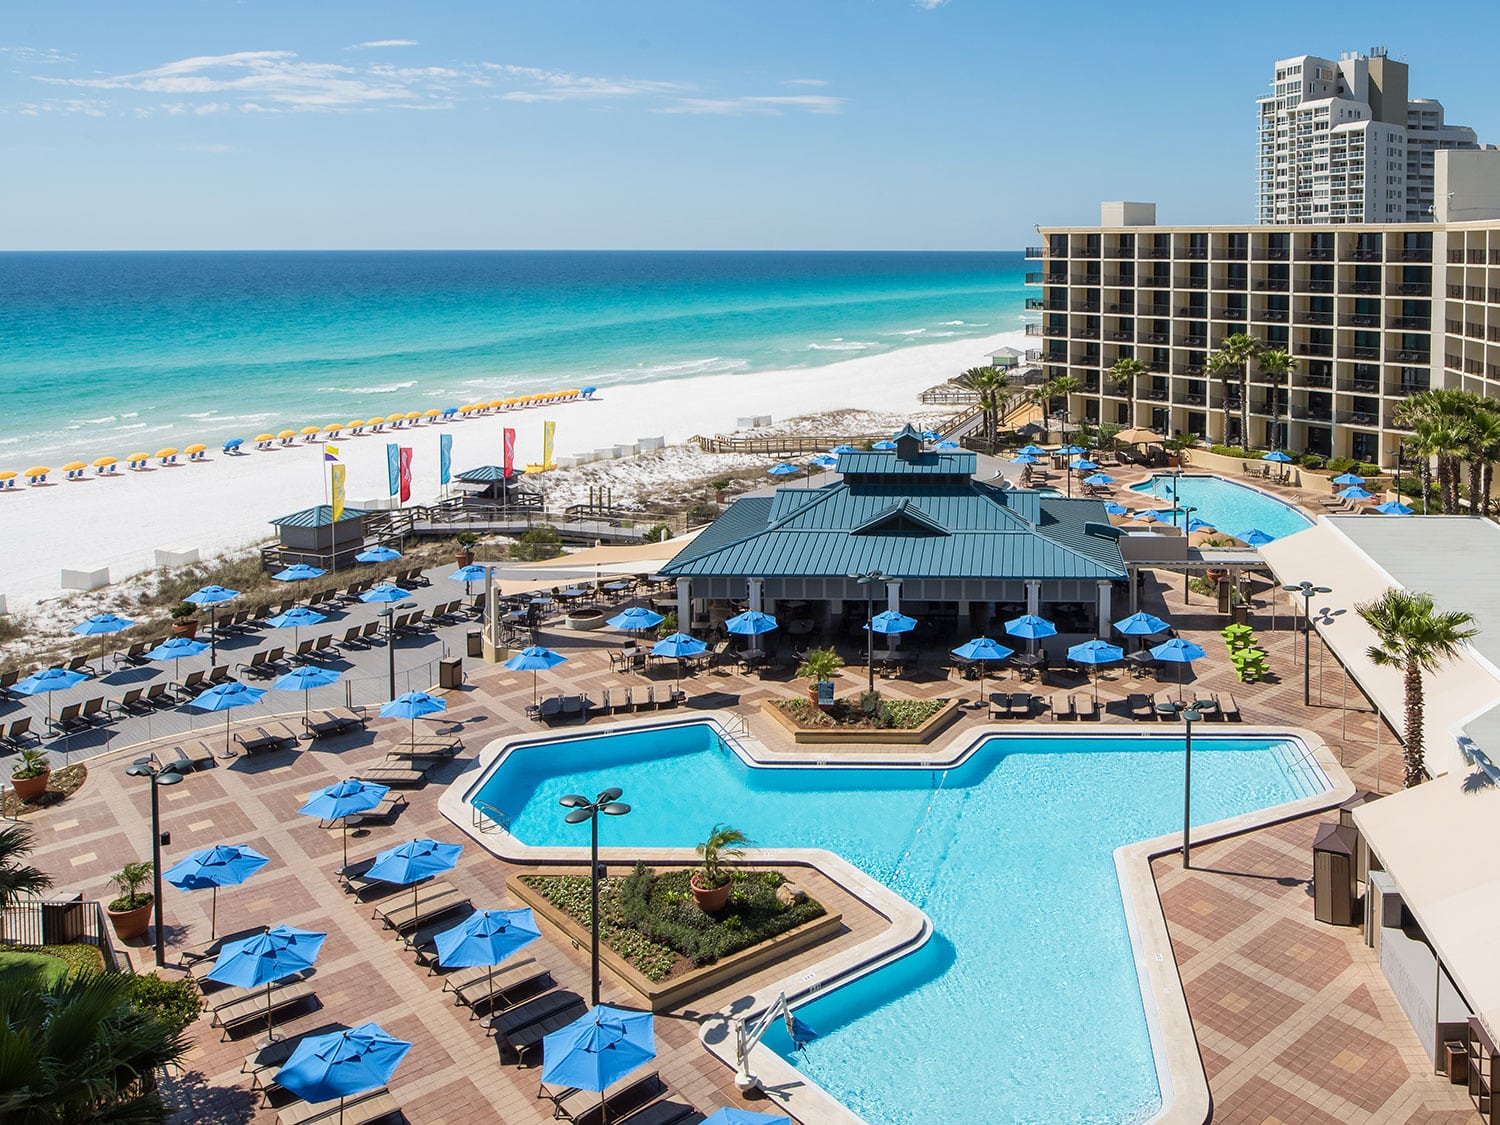 The pool and adjacent beach at the Hilton Sandestin Beach Golf Resort and Spa in Florida.